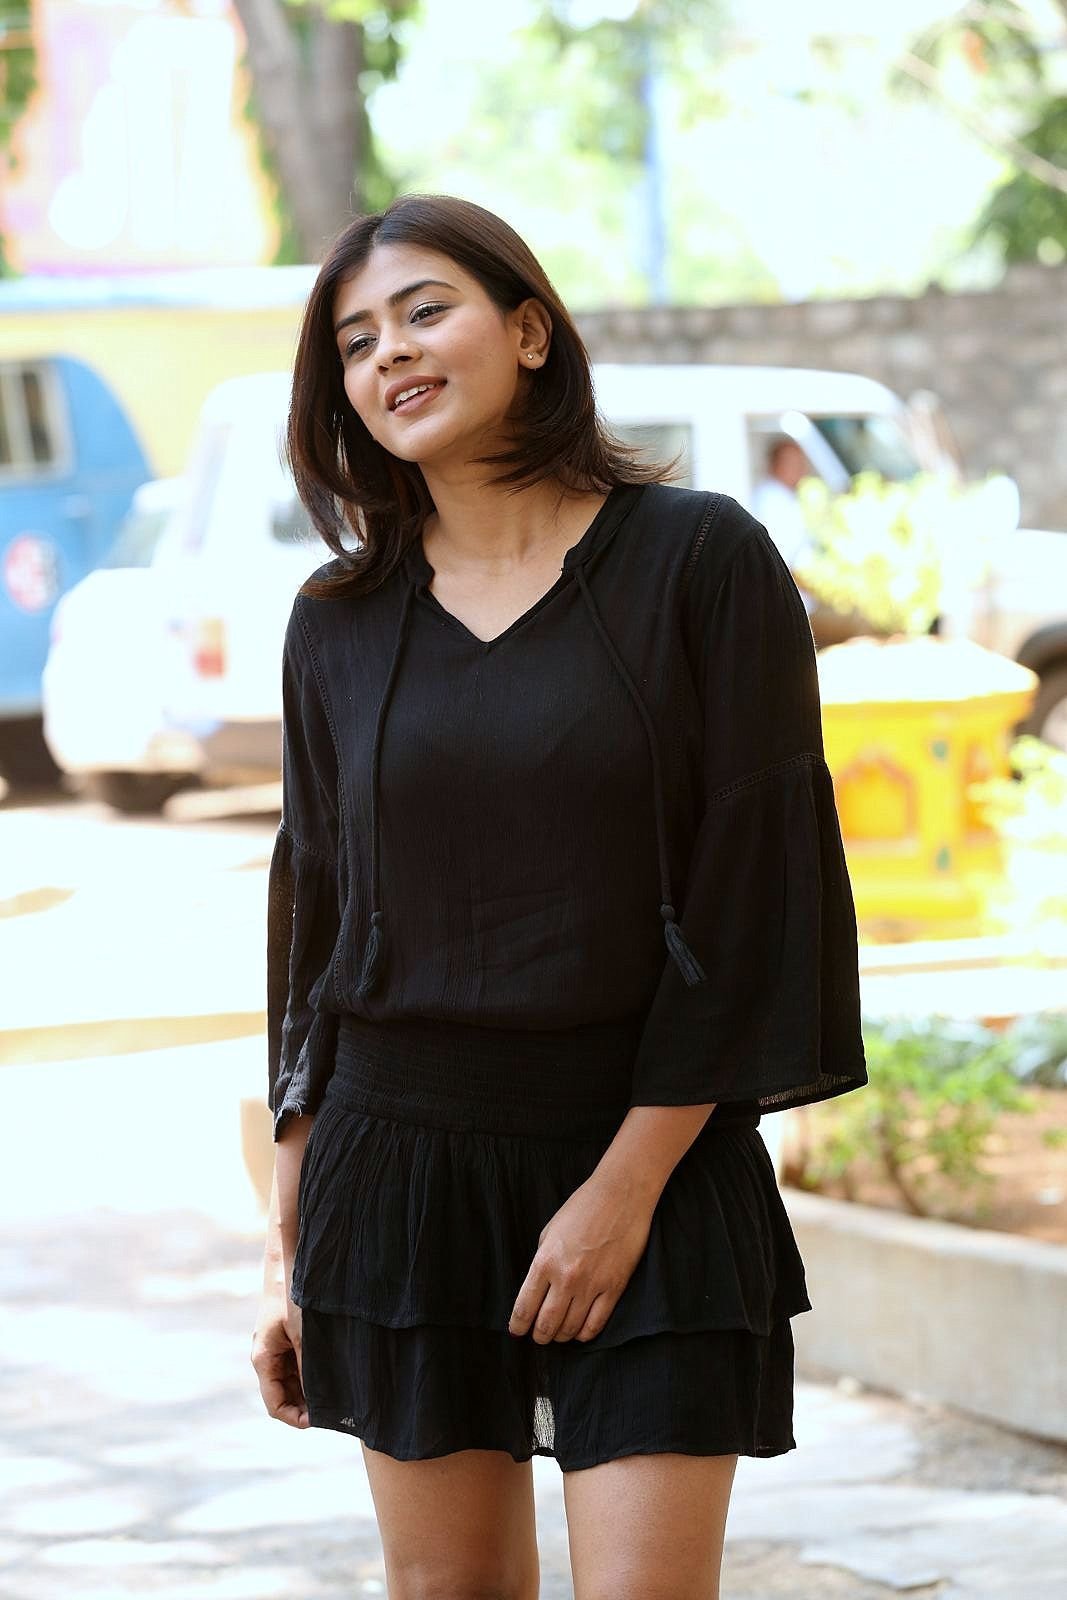 Actress Hebah Patel Hot at Angel Movie Teaser Launch Photos | Picture 1494193